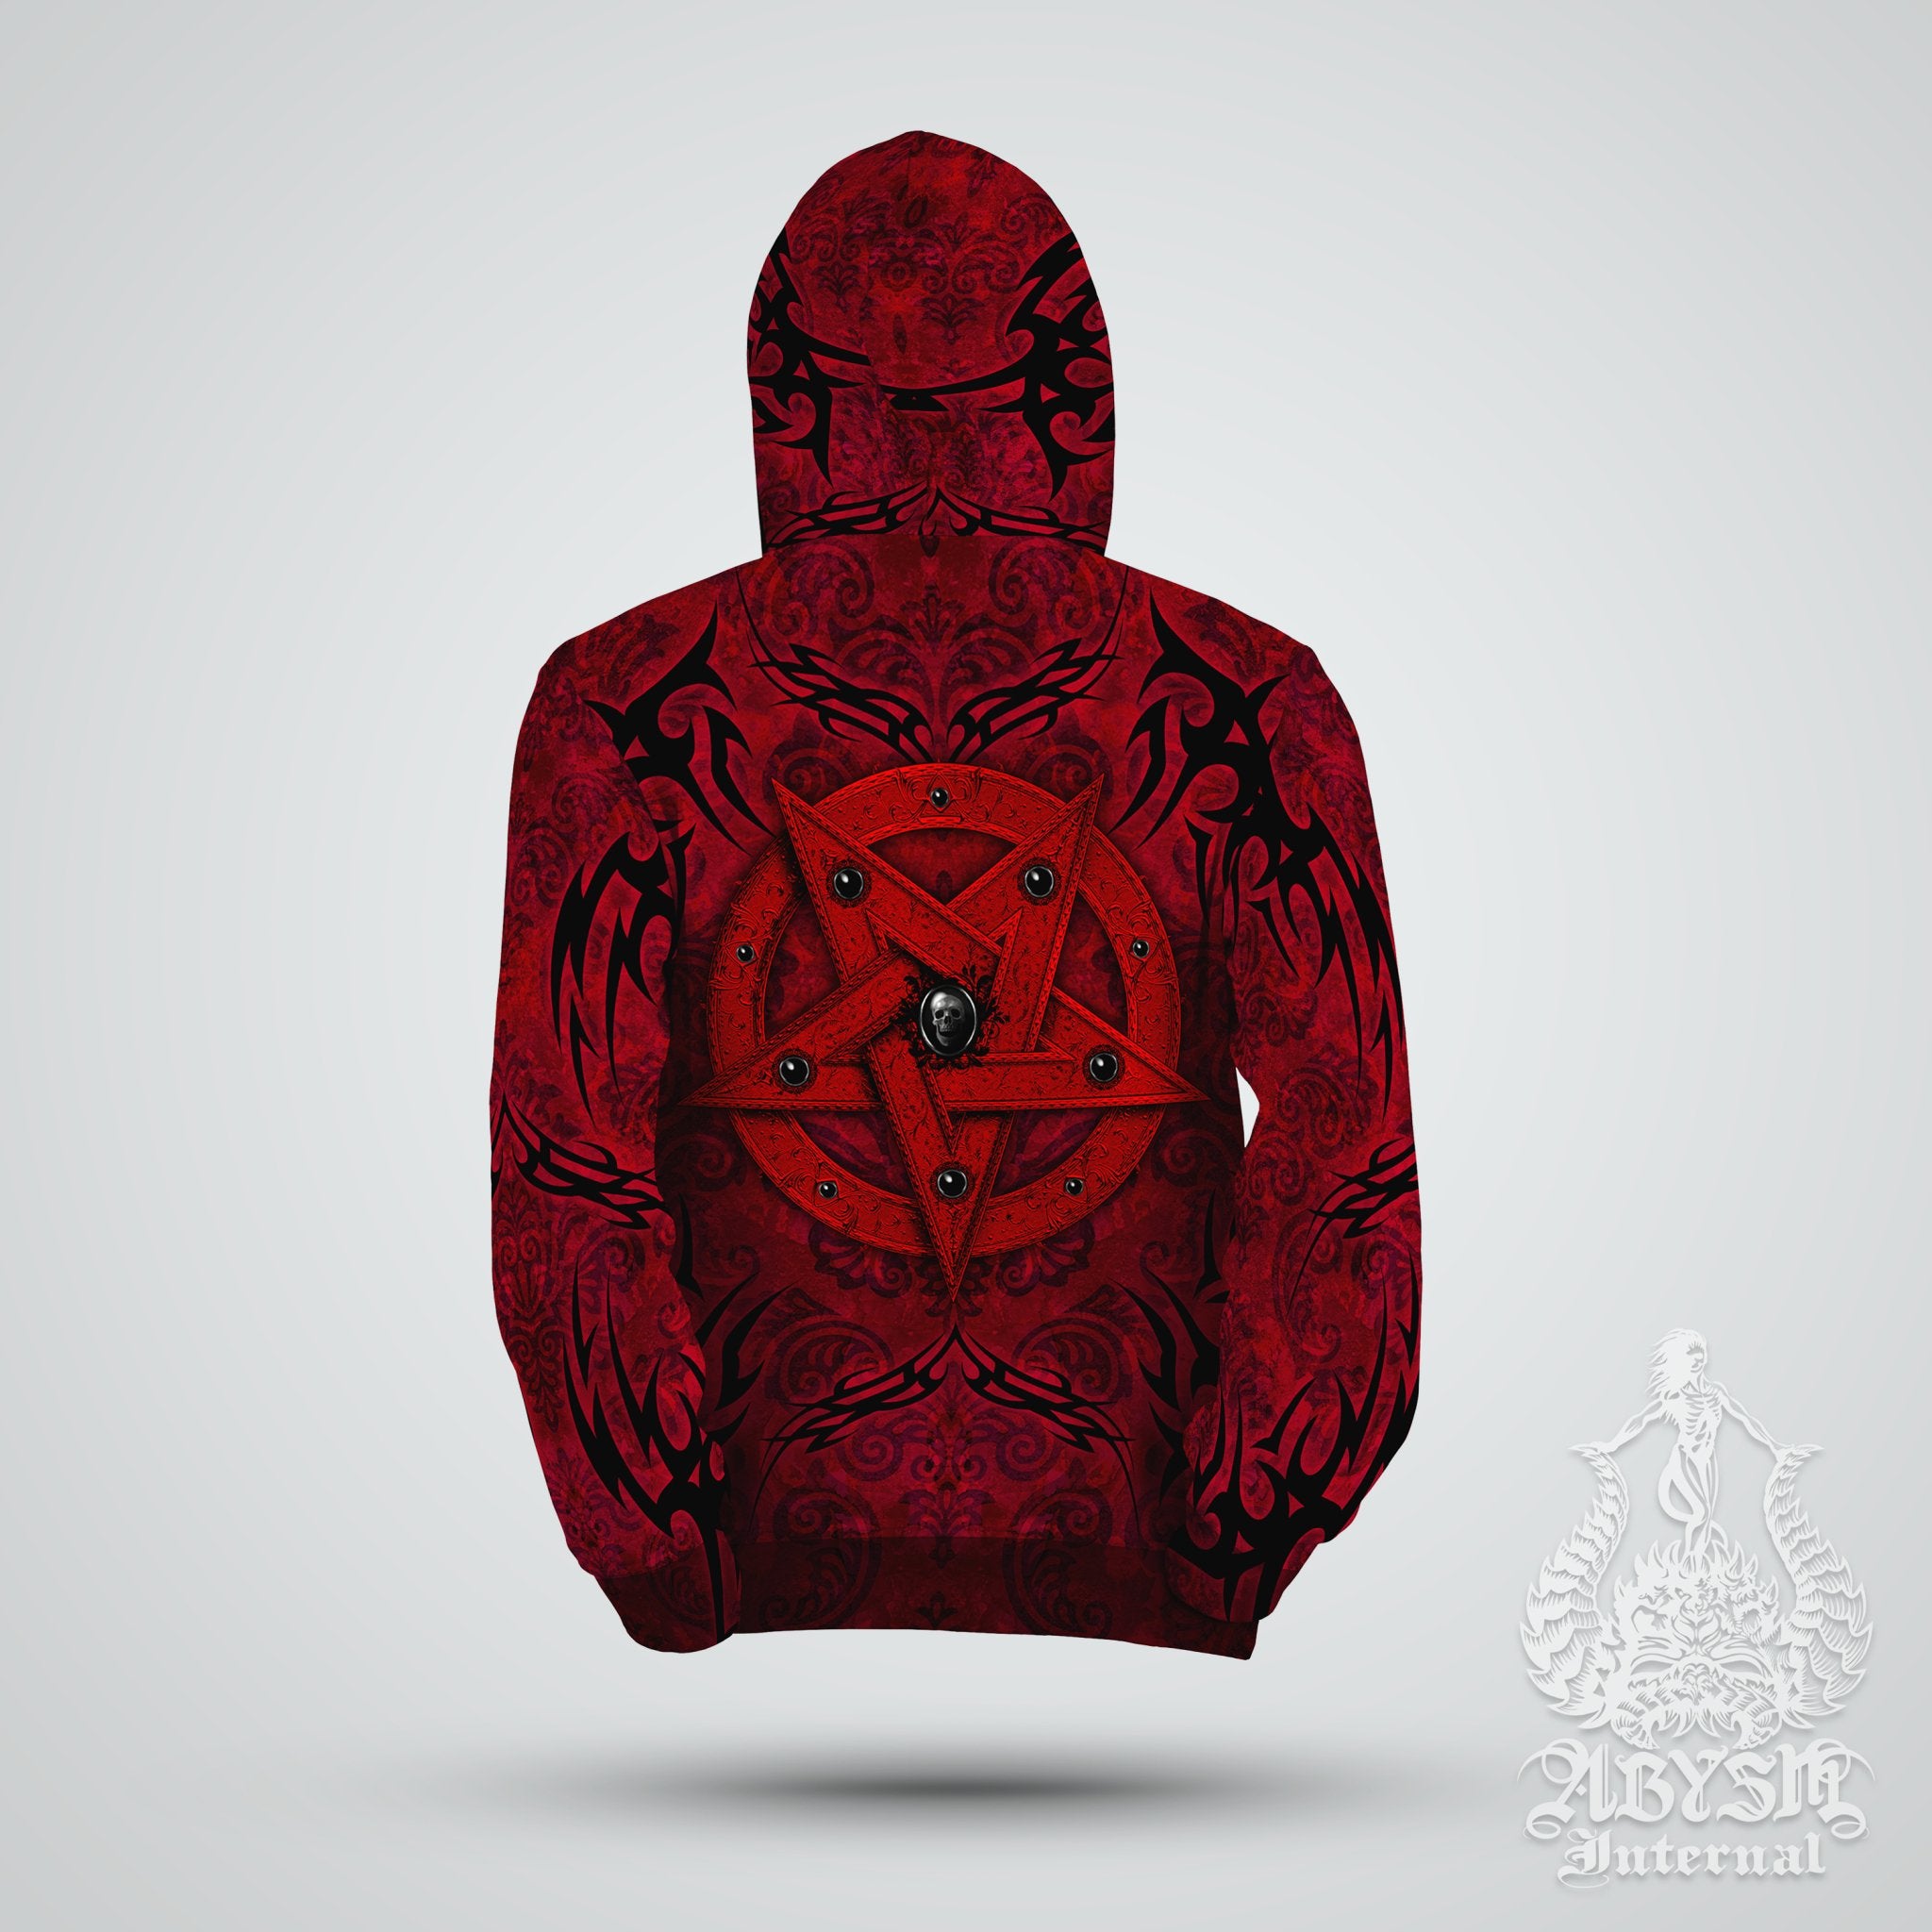 Red Pentagram Hoodie, Black Metal Streetwear, Gothic Sweater, Satanic Goth Outfit, Alternative Clothing, Unisex - Black and Red, 2 Colors - Abysm Internal